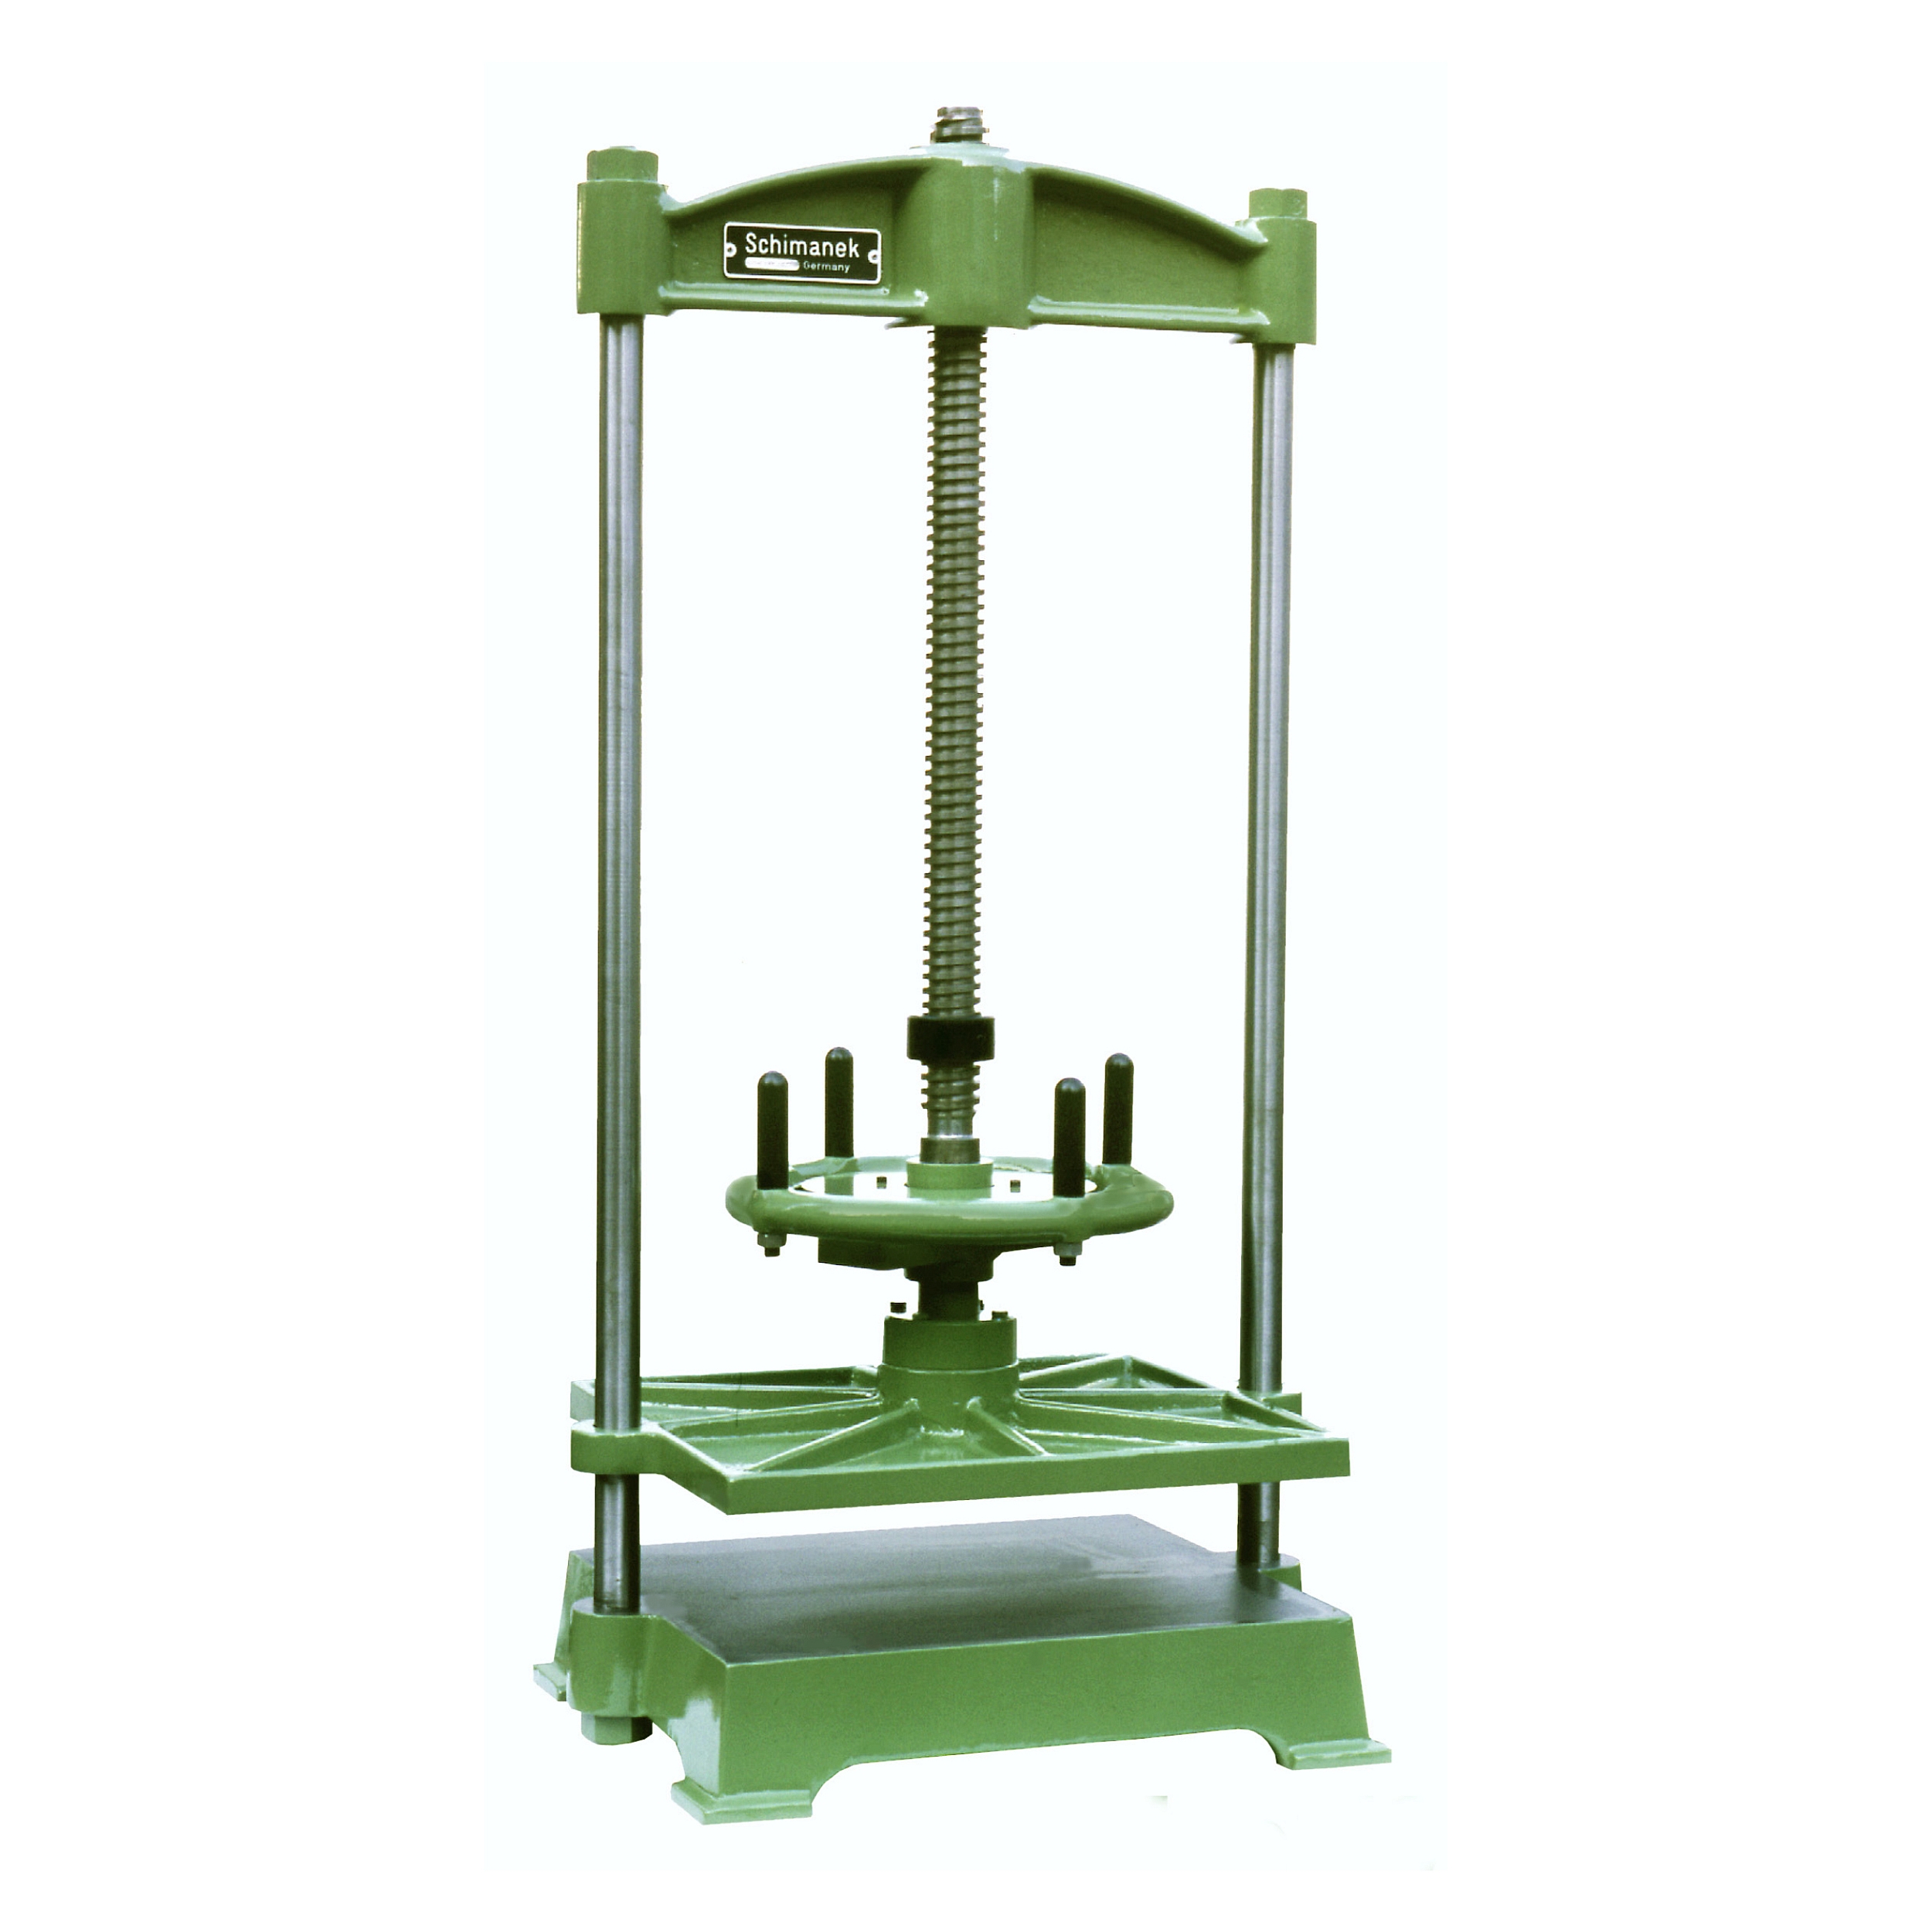 Smoothing/Baling press - Type 49 - Pressing area (mm) 490 x 560 - versatile use for bookbinding and conservation works...